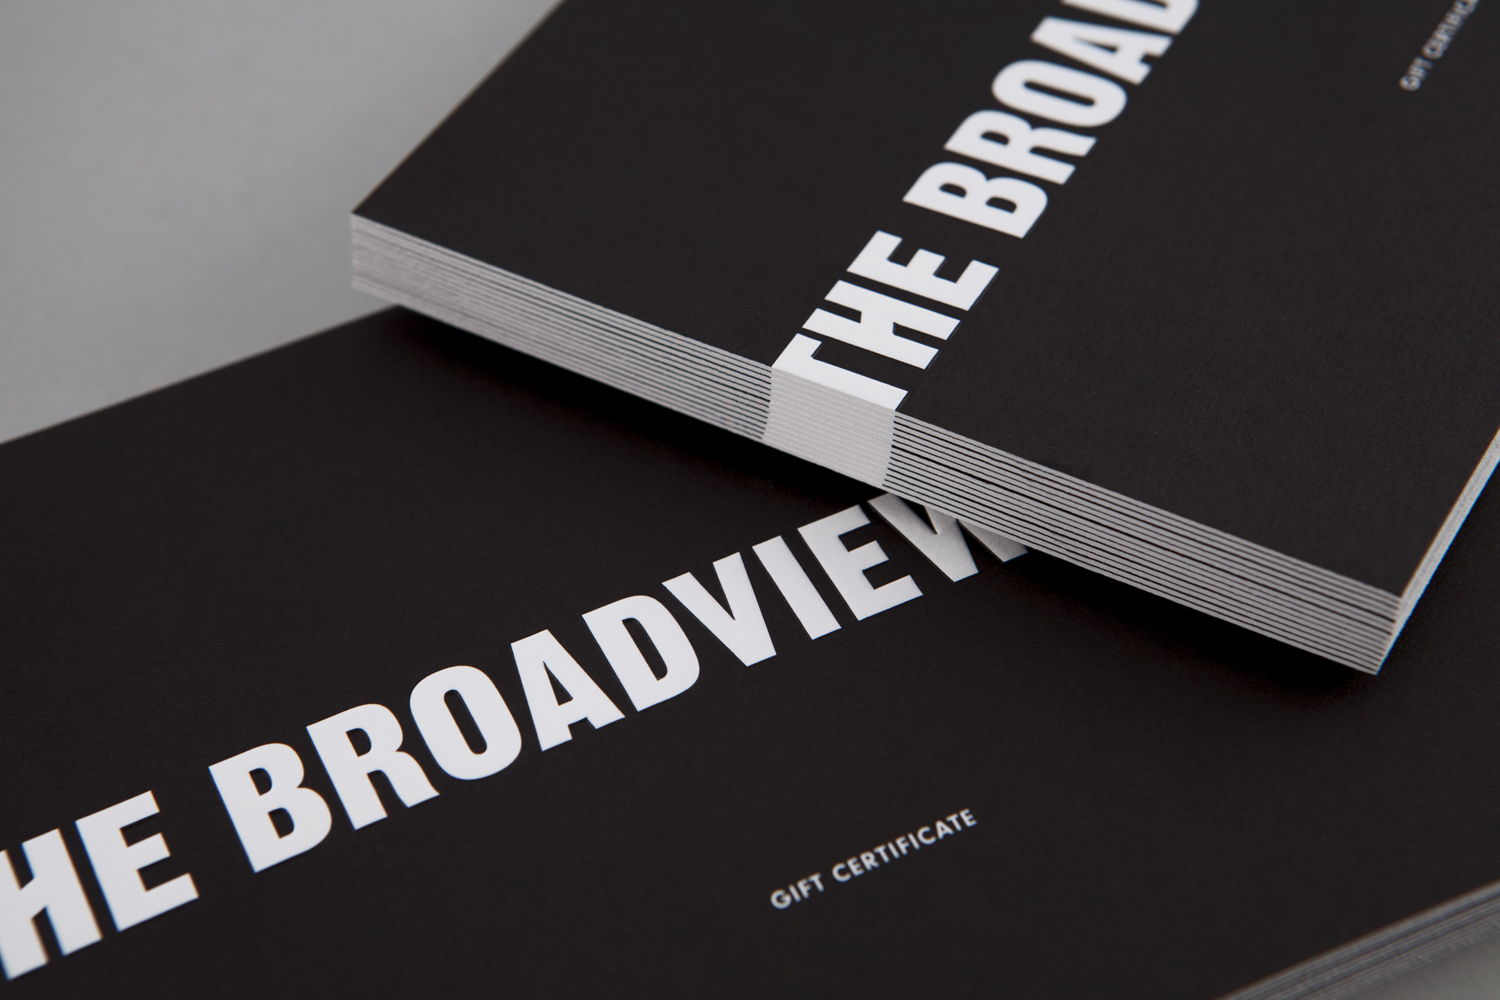 Visual identity and gift certificate designed by Blok for Toronto's The Broadview Hotel